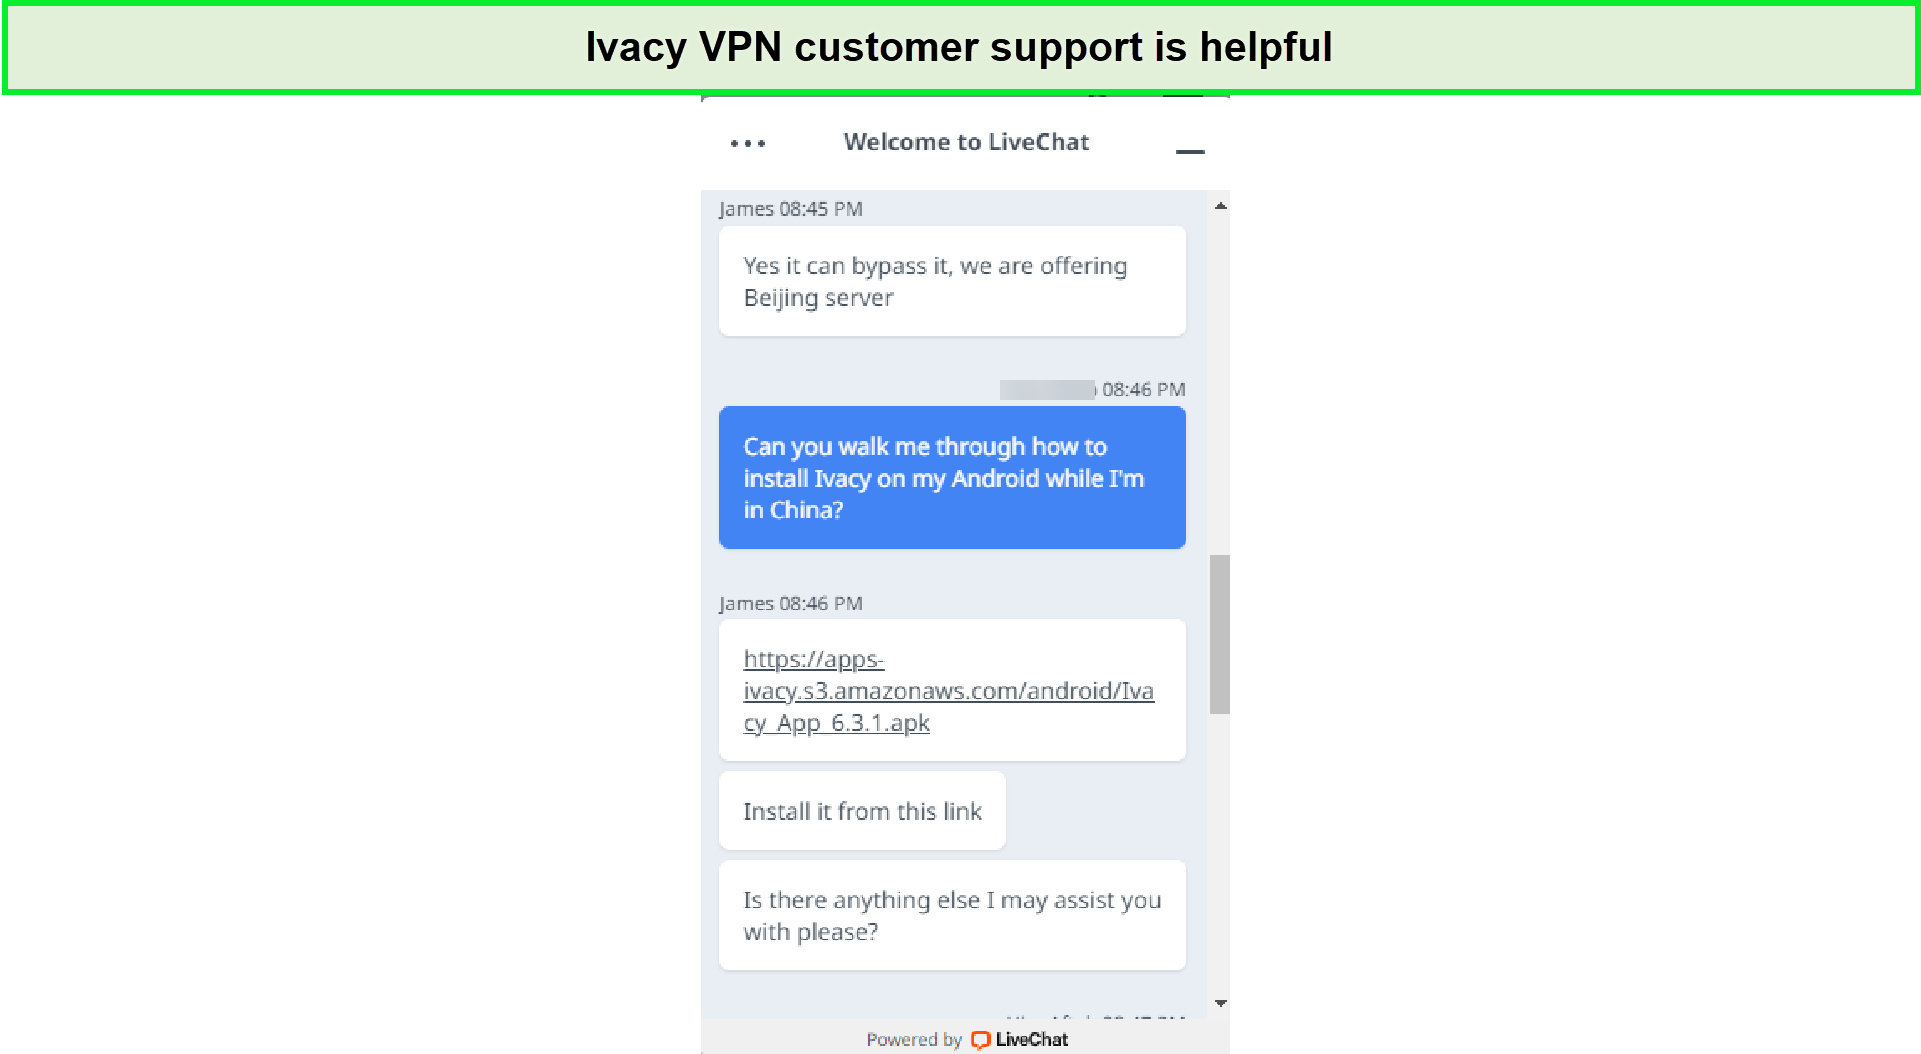 ivacy-customer-support-in-Netherlands